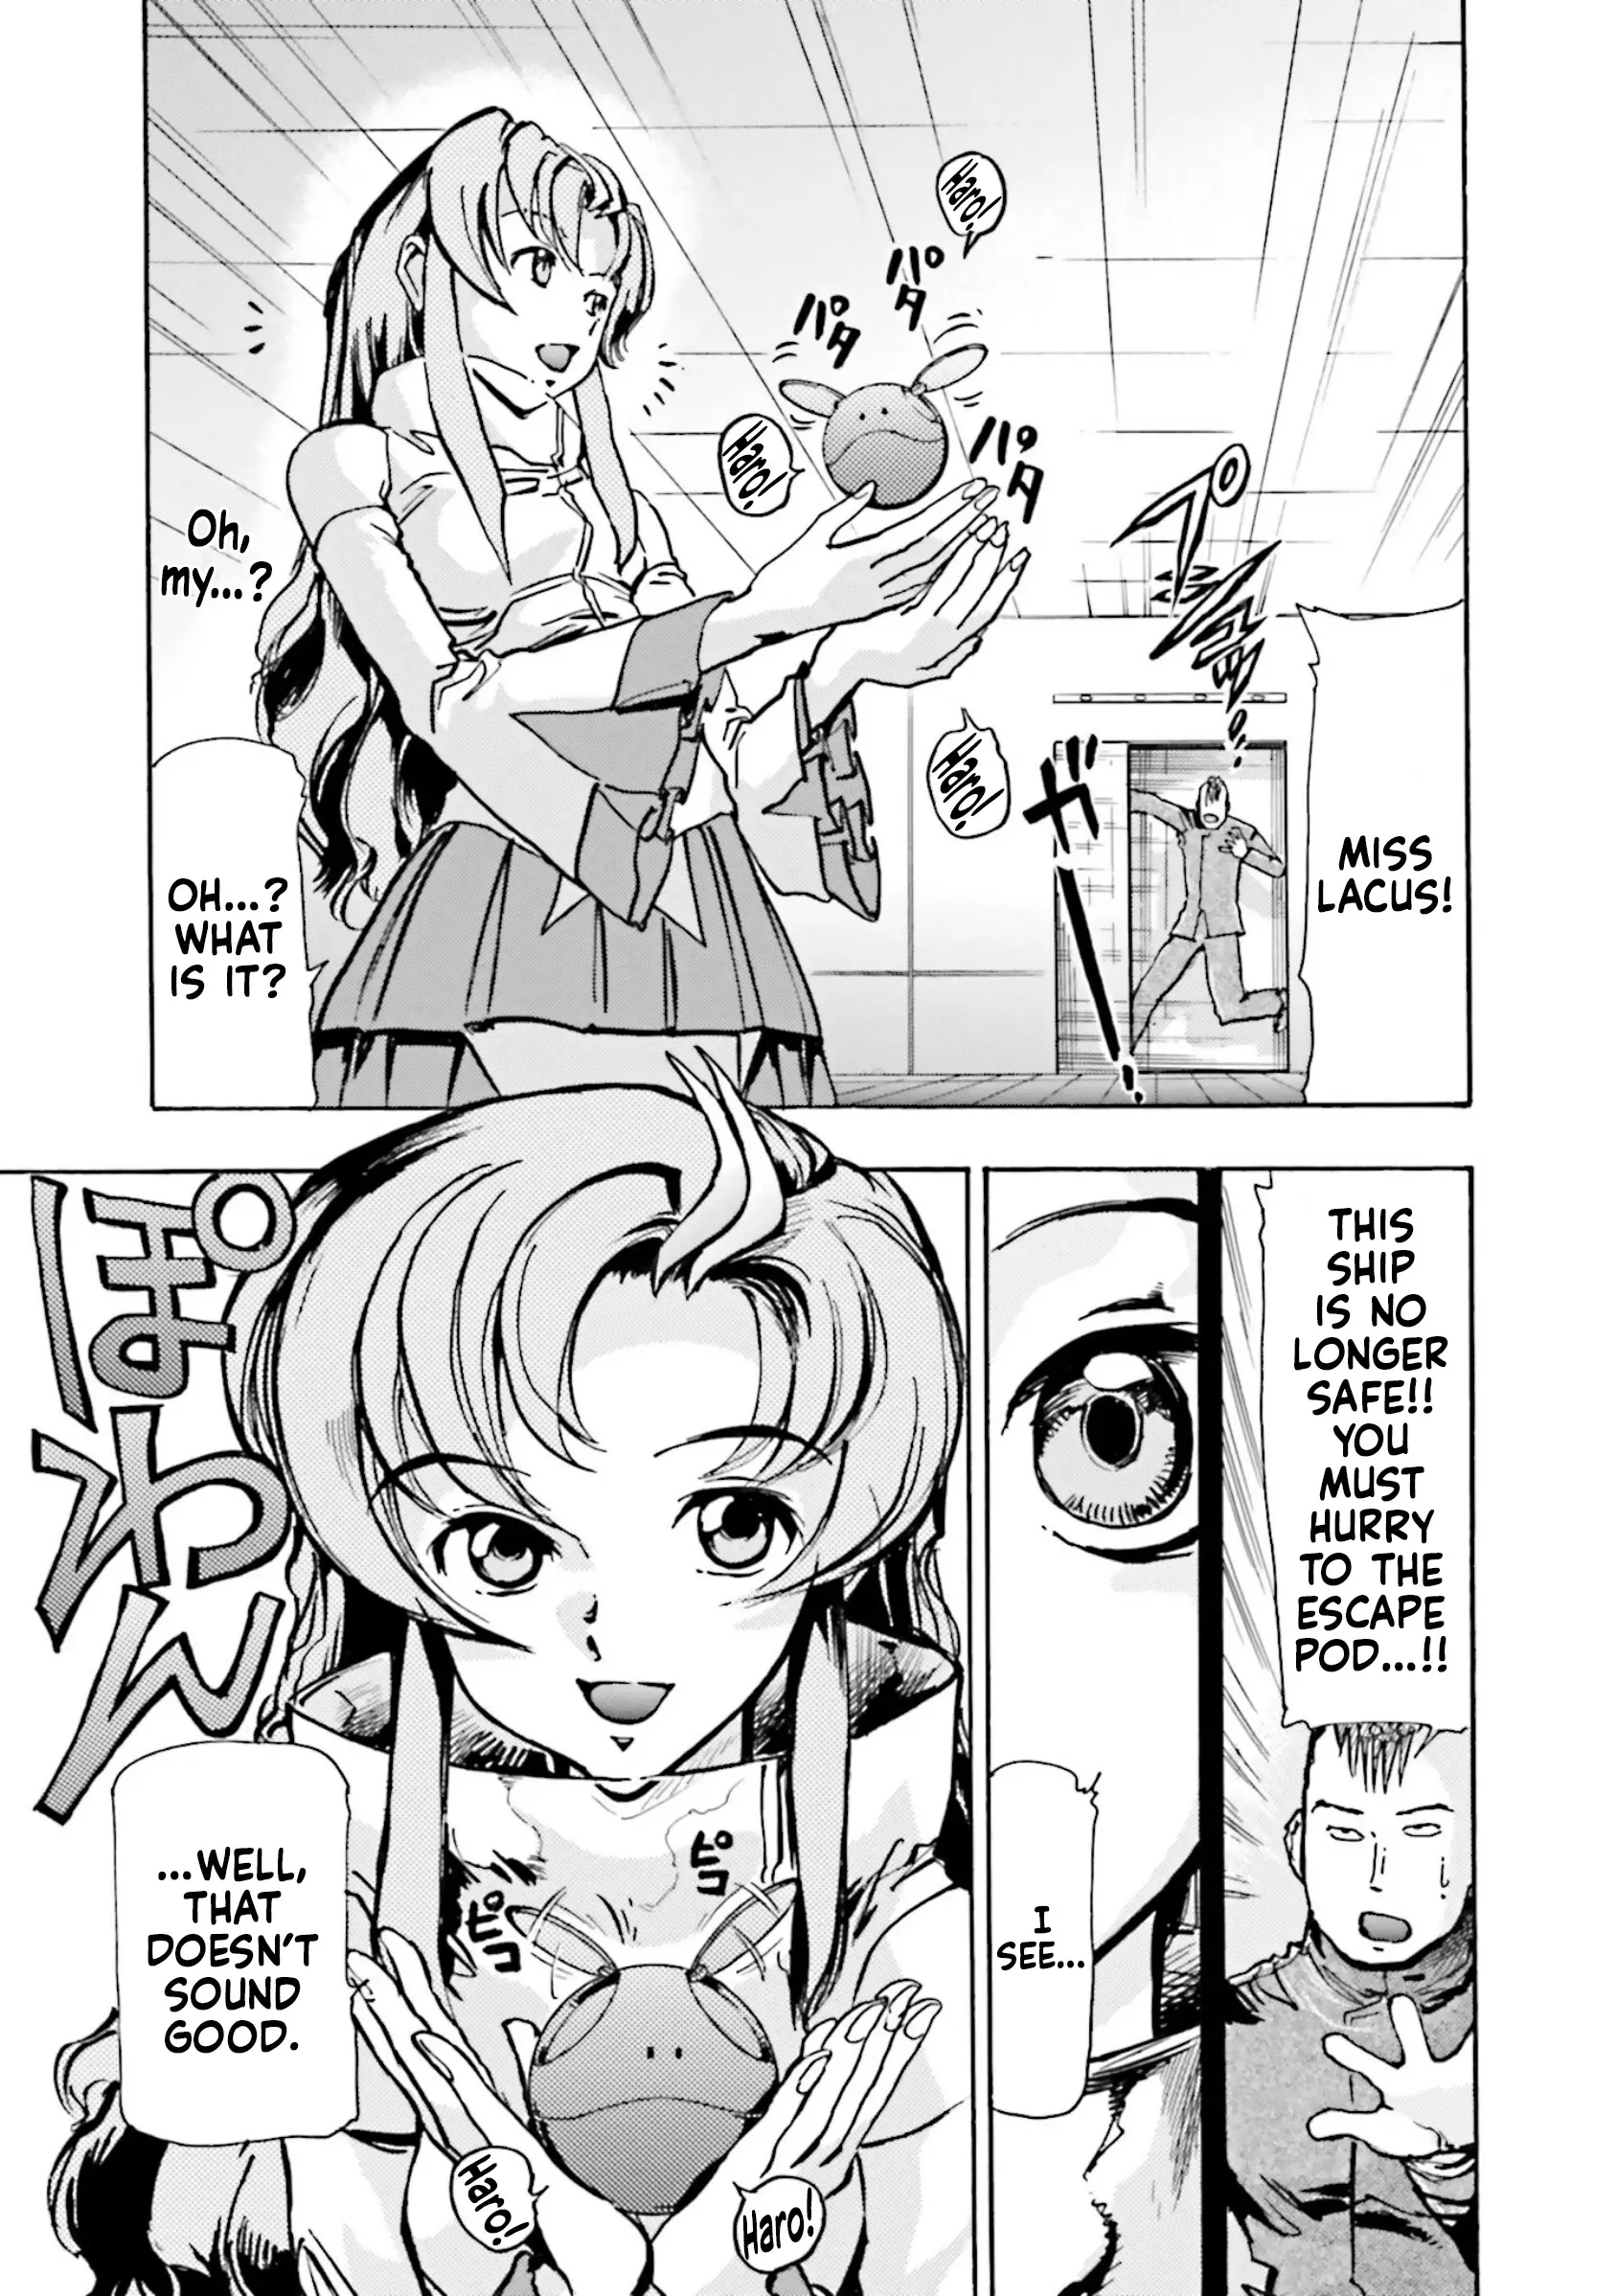 Mobile Suit Gundam Seed Astray R - 4 page 8-12d2f70a